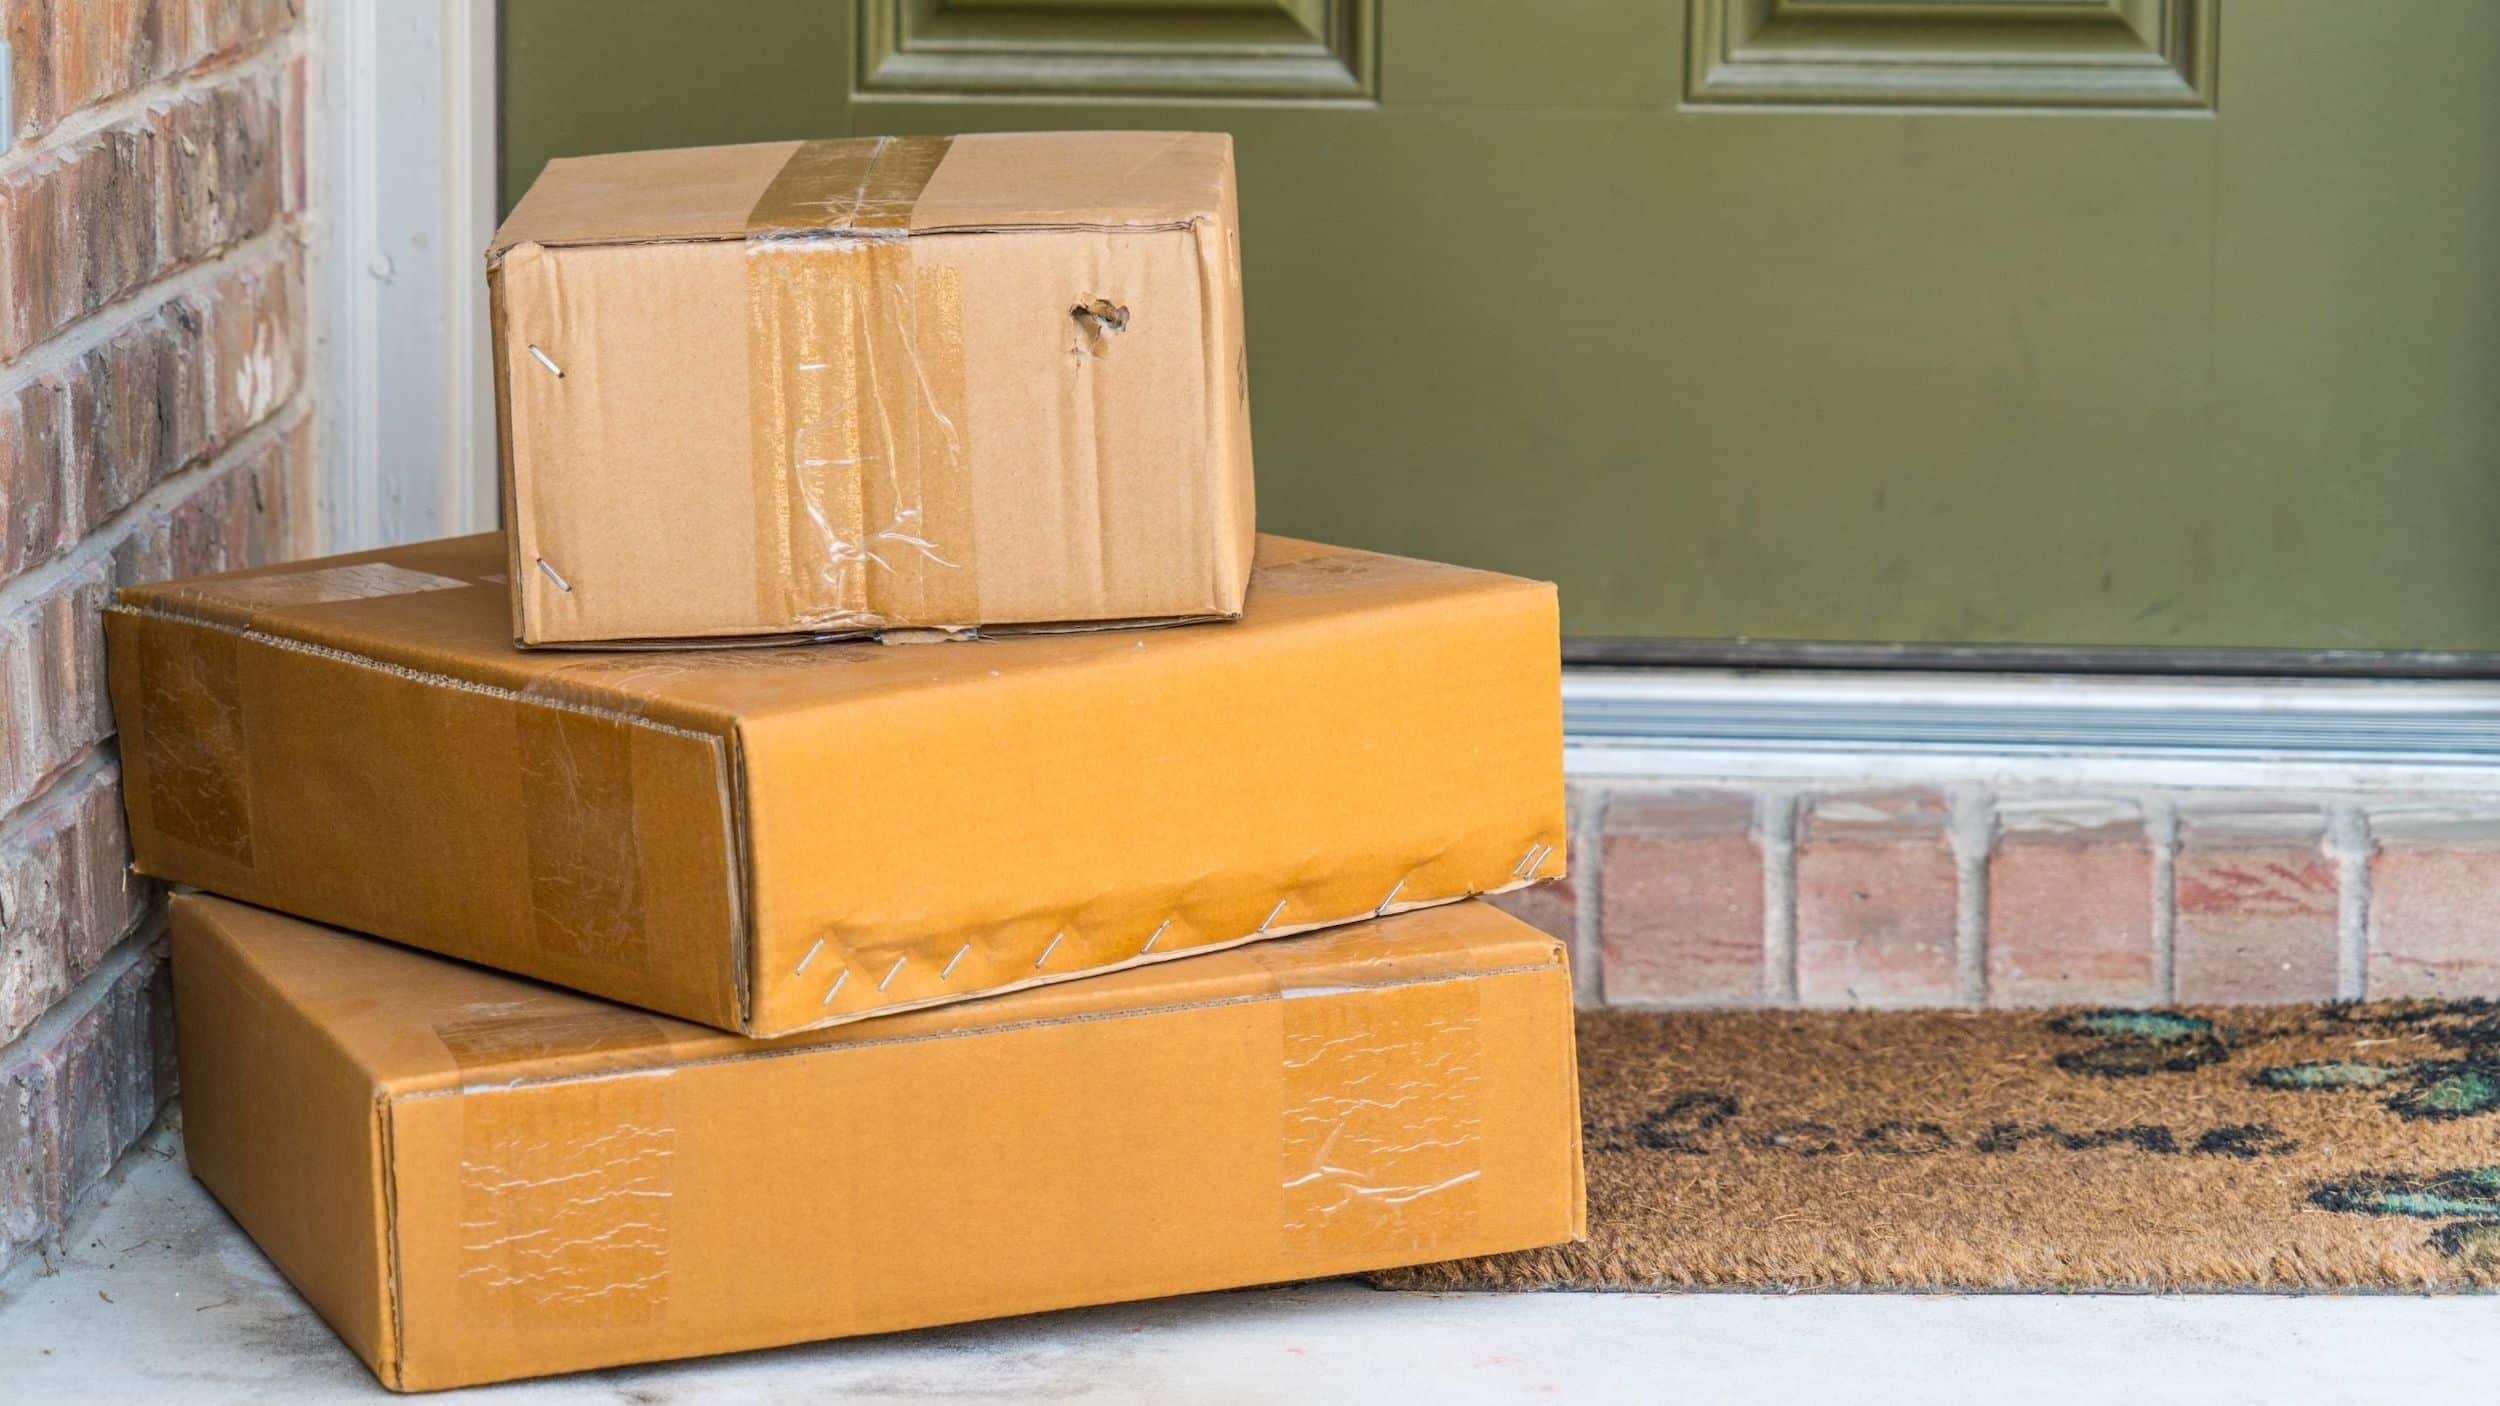 3 boxes stacked on each other sitting on porch in front of a green front door.